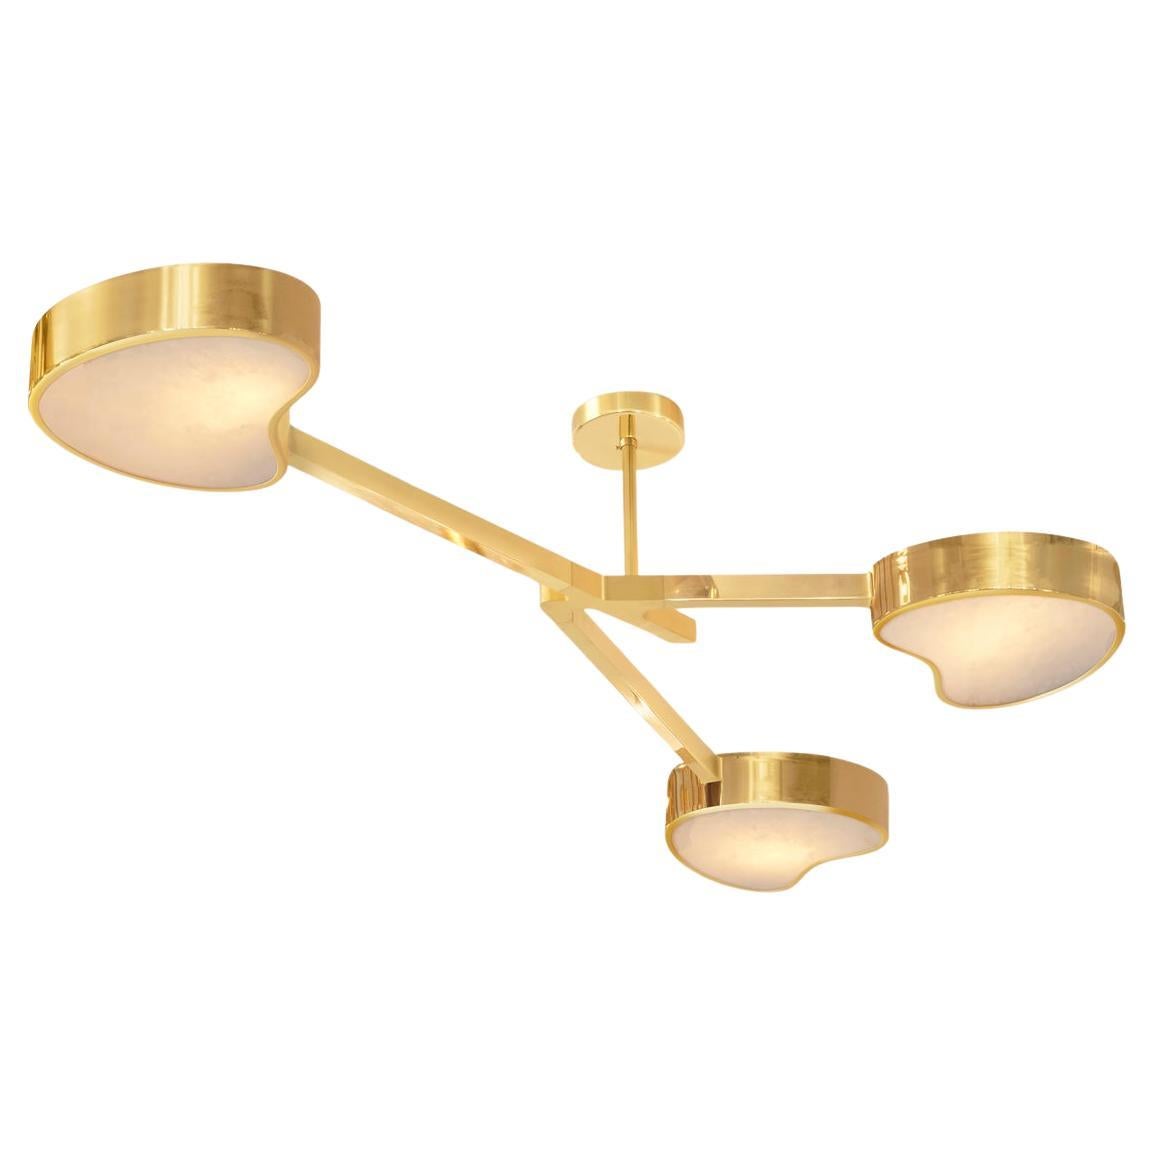 Cuore N.3 Ceiling Light by Gaspare Asaro. Polished Brass Finish For Sale